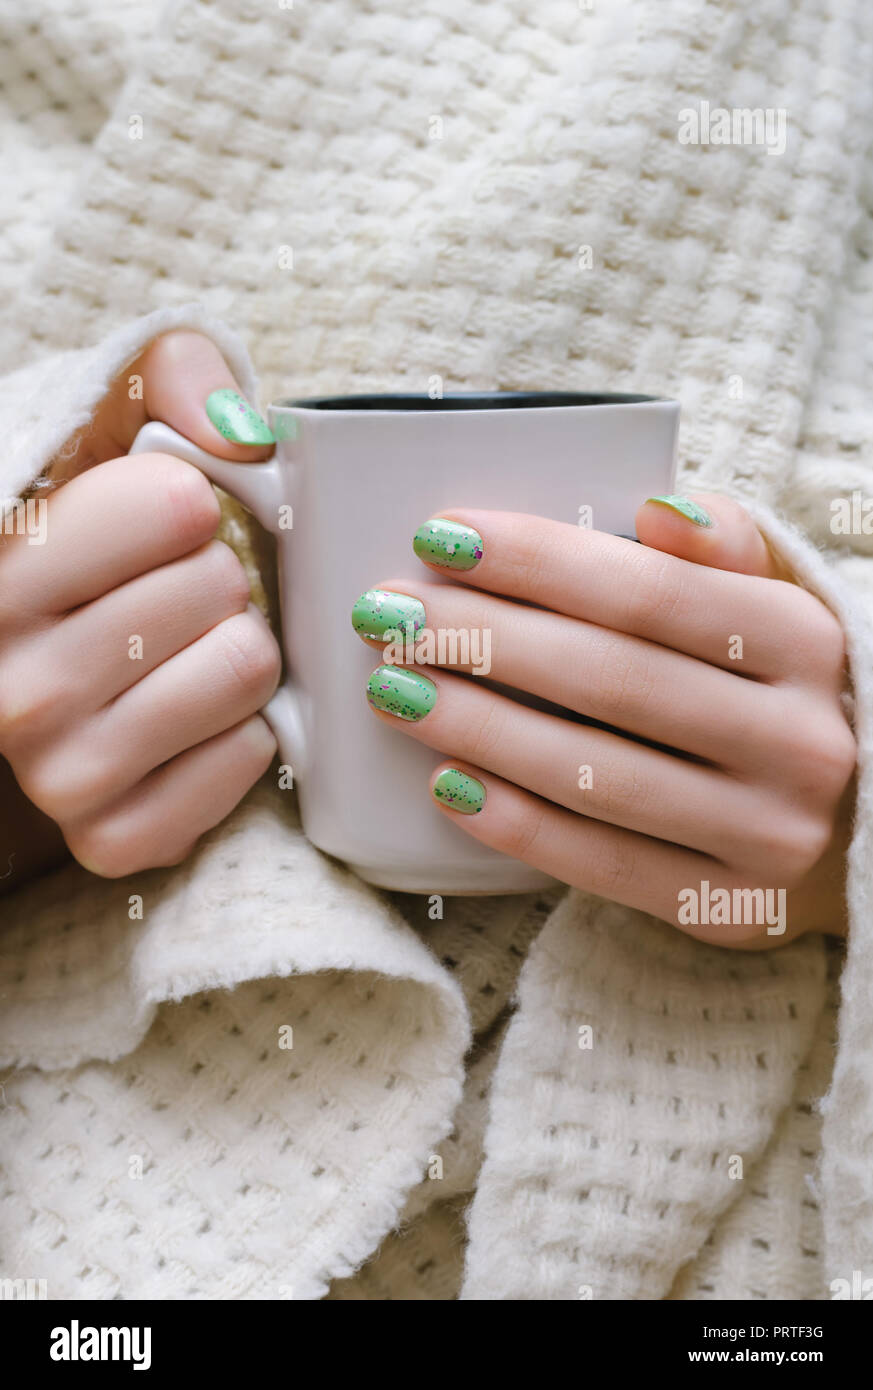 Green Nails Stock Photos and Pictures - 101,757 Images | Shutterstock